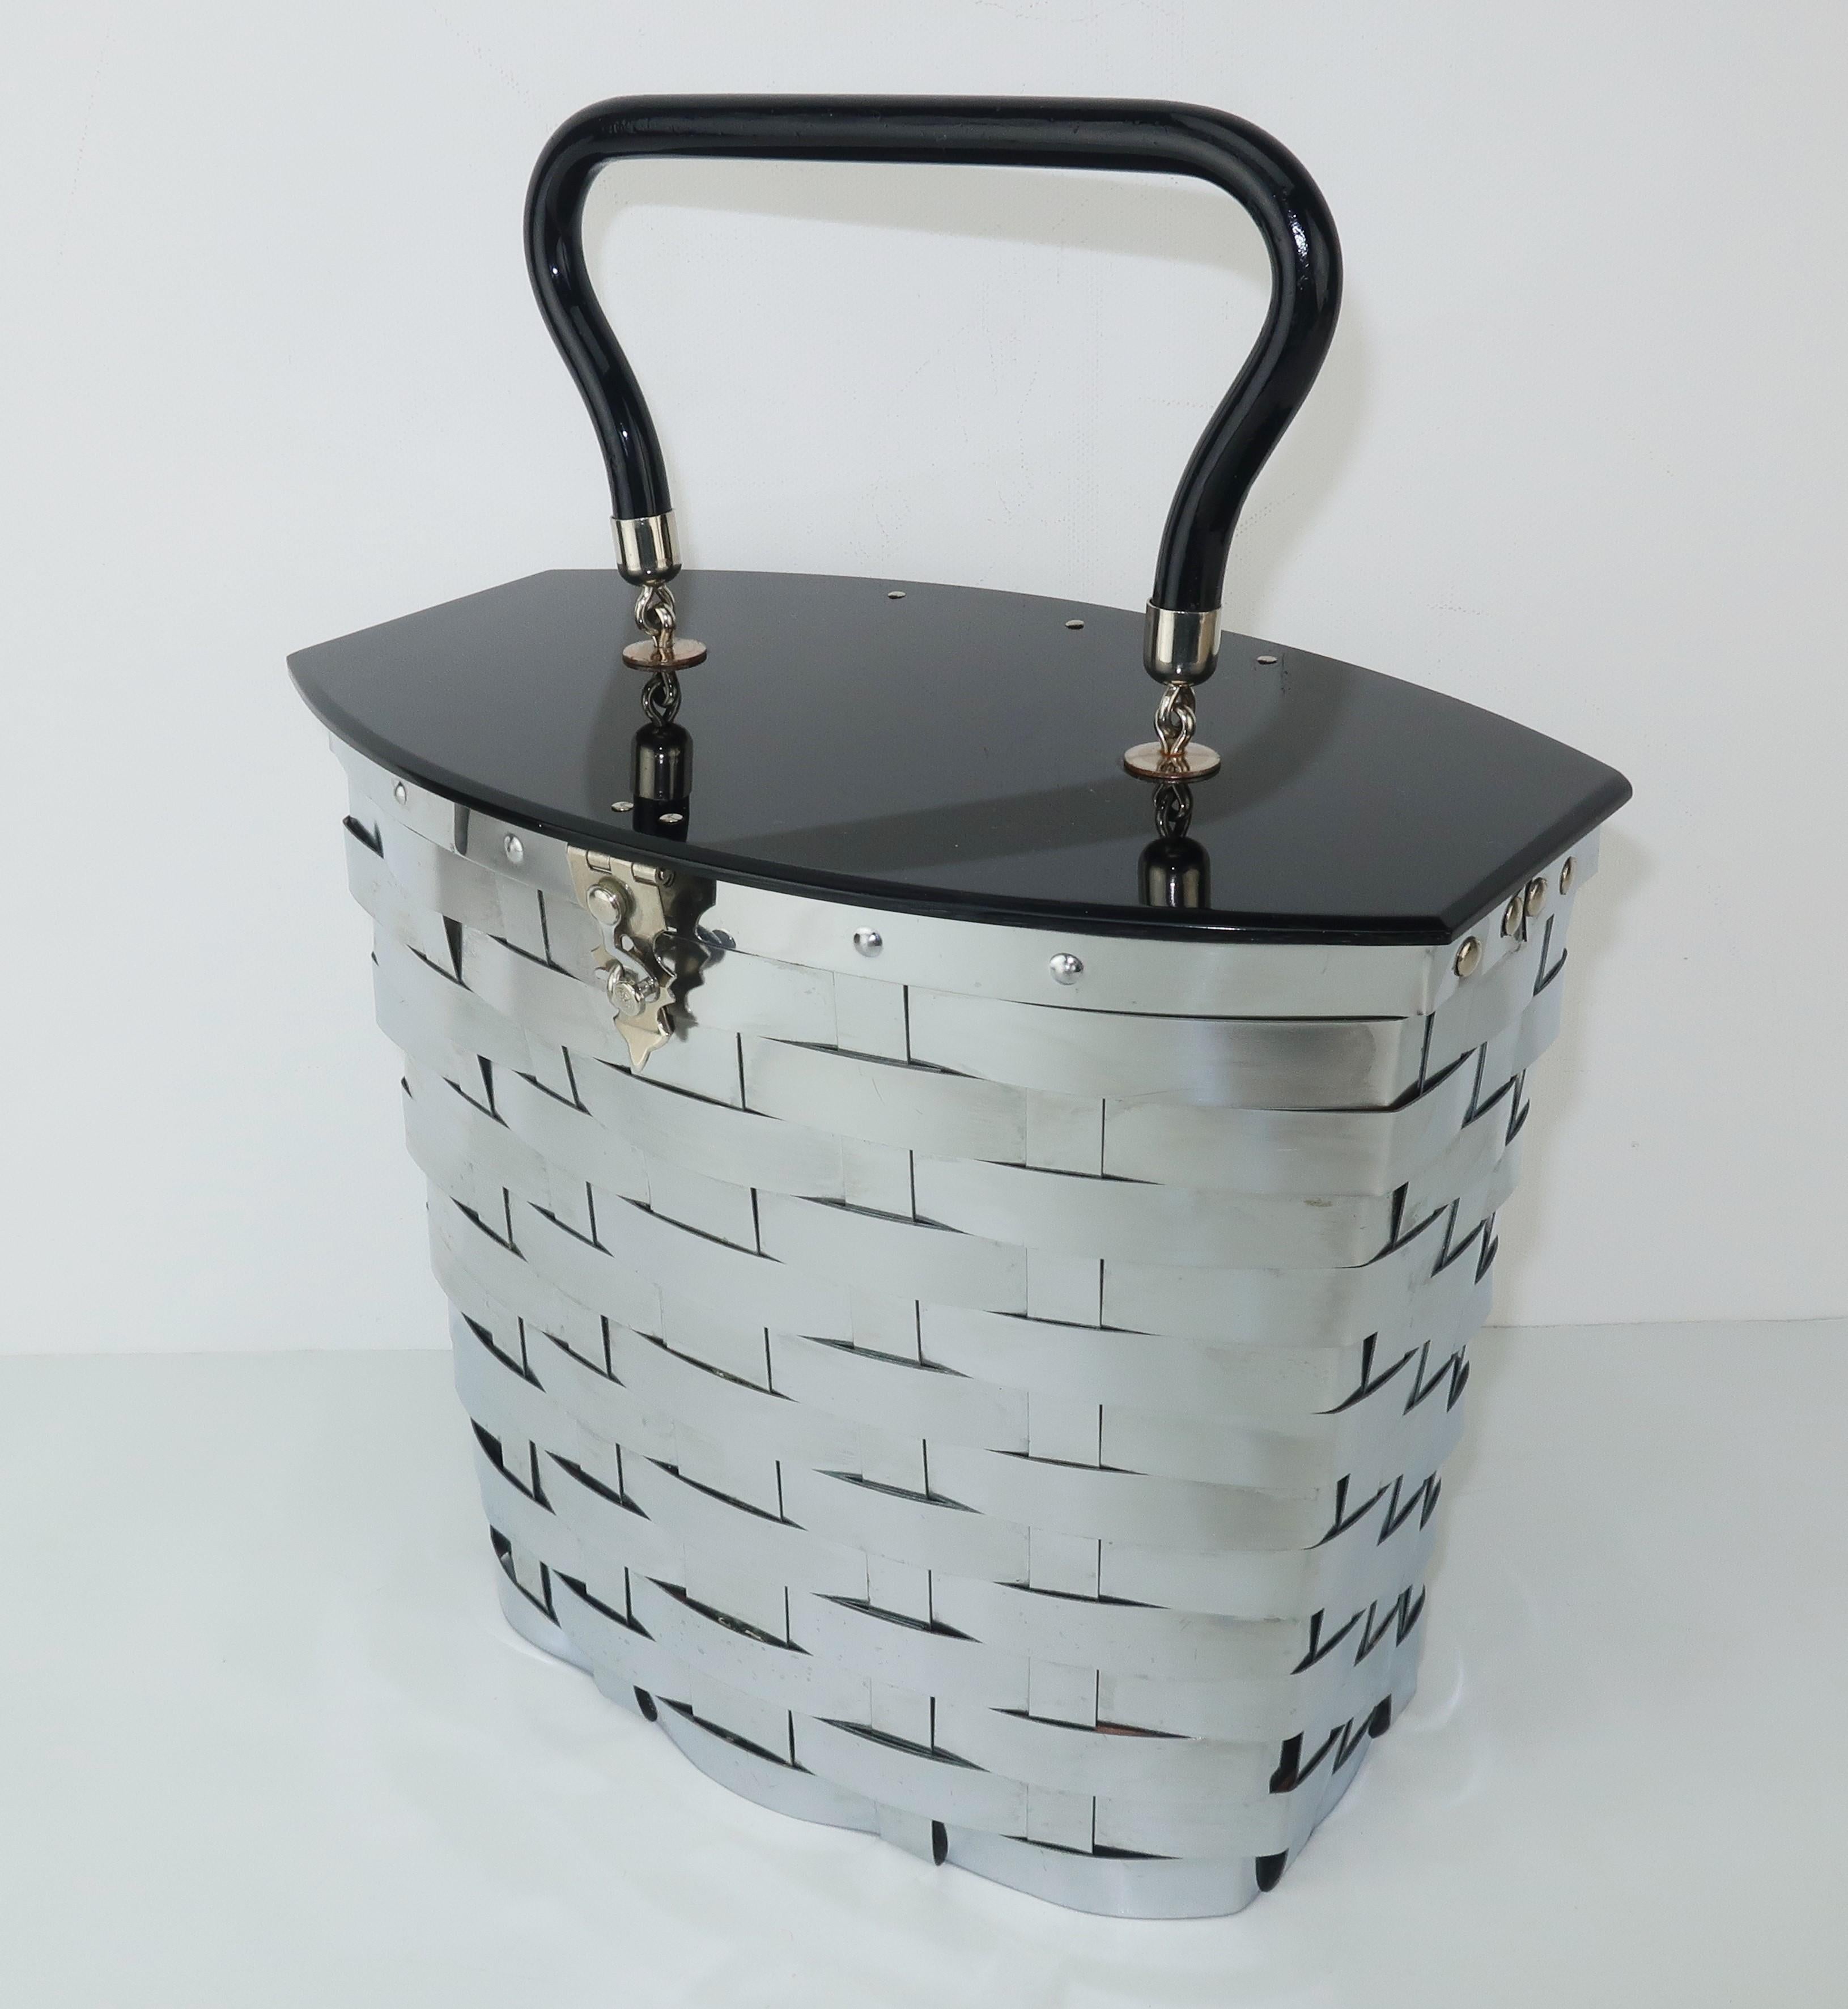 A tisket a tasket ... a fabulous Dorset Rex basket!  In the 1950’s two companies specializing in powder compacts merged to create Dorset Rex Fifth Avenue and began designing fun handbags with a combination of metal and plastics.  This bag has a